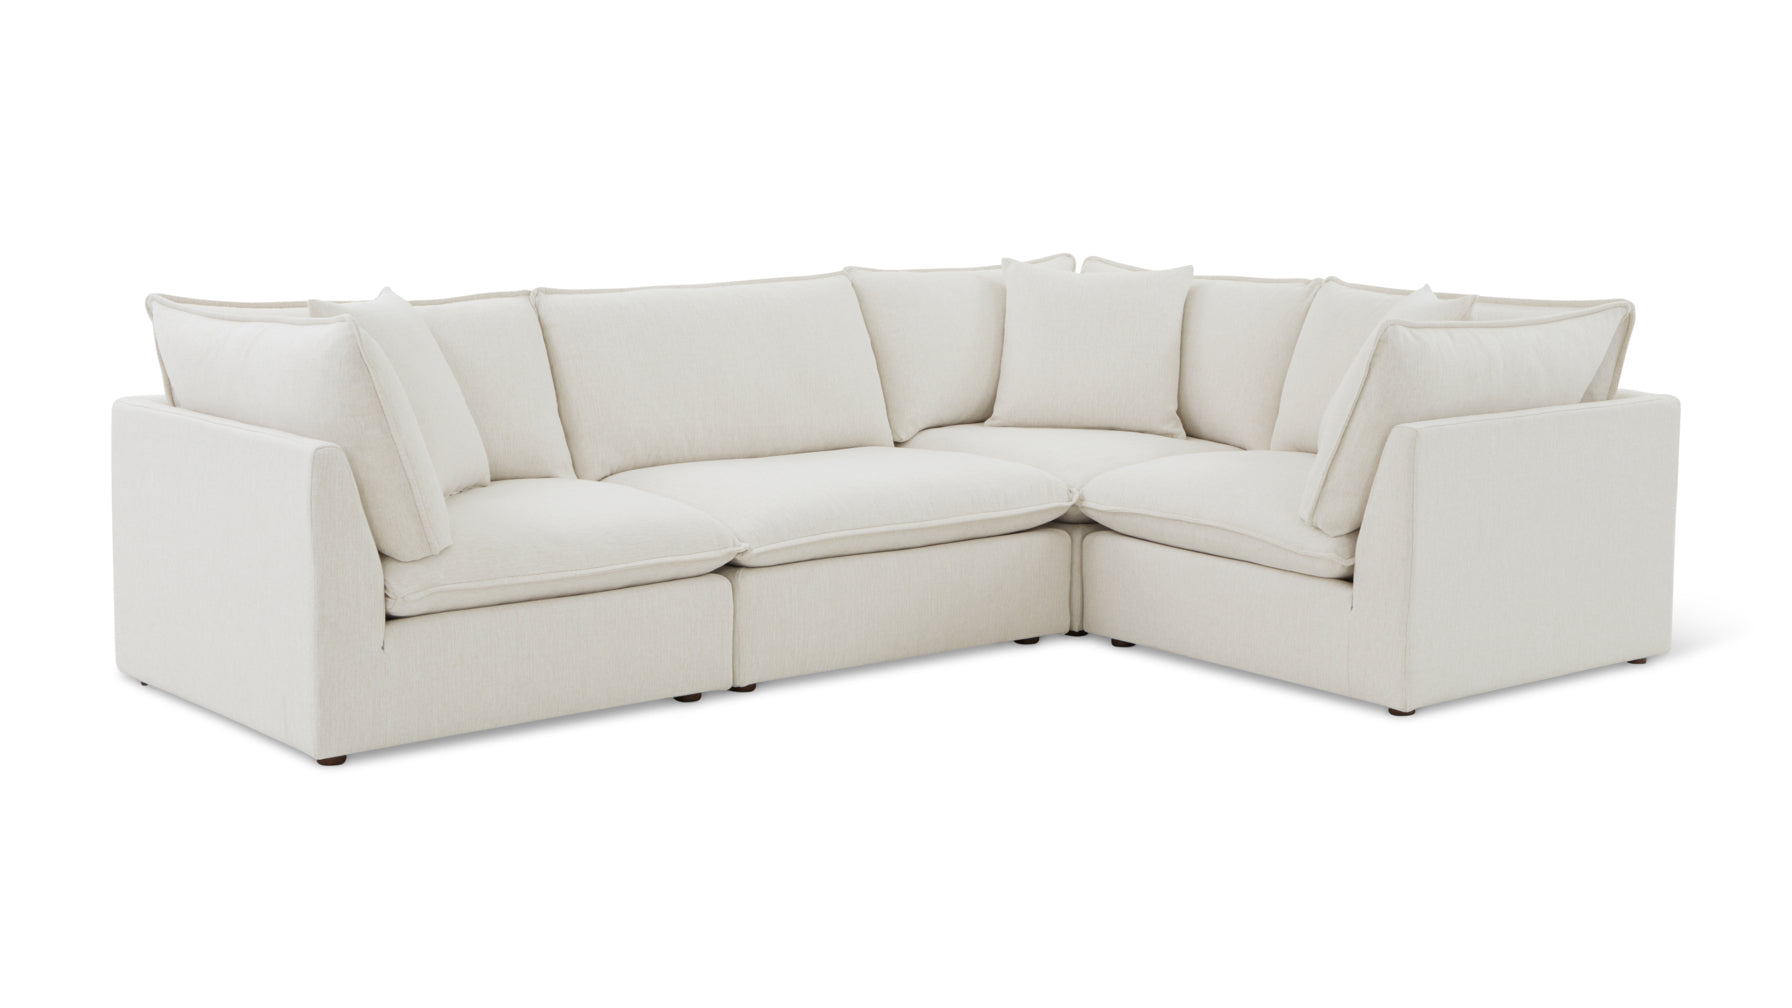 Chill Time 4-Piece Modular Sectional Closed, Birch - Image 2